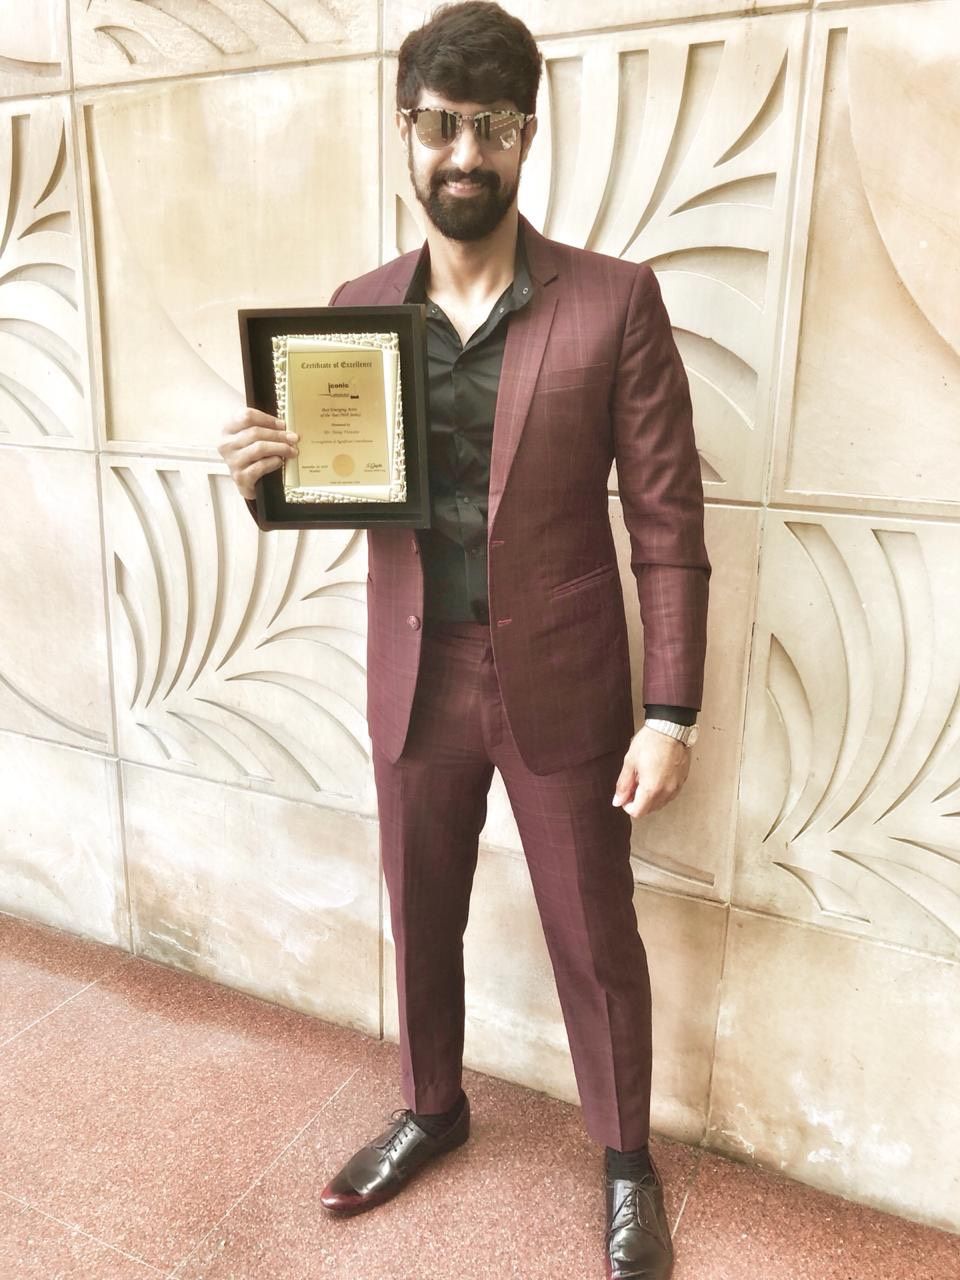 Tanuj Virwani Wins Best Emerging Actor At Iconic Achievers Awards For Inside Edge, Anupam Kher And Ranveer Shorey Win Too